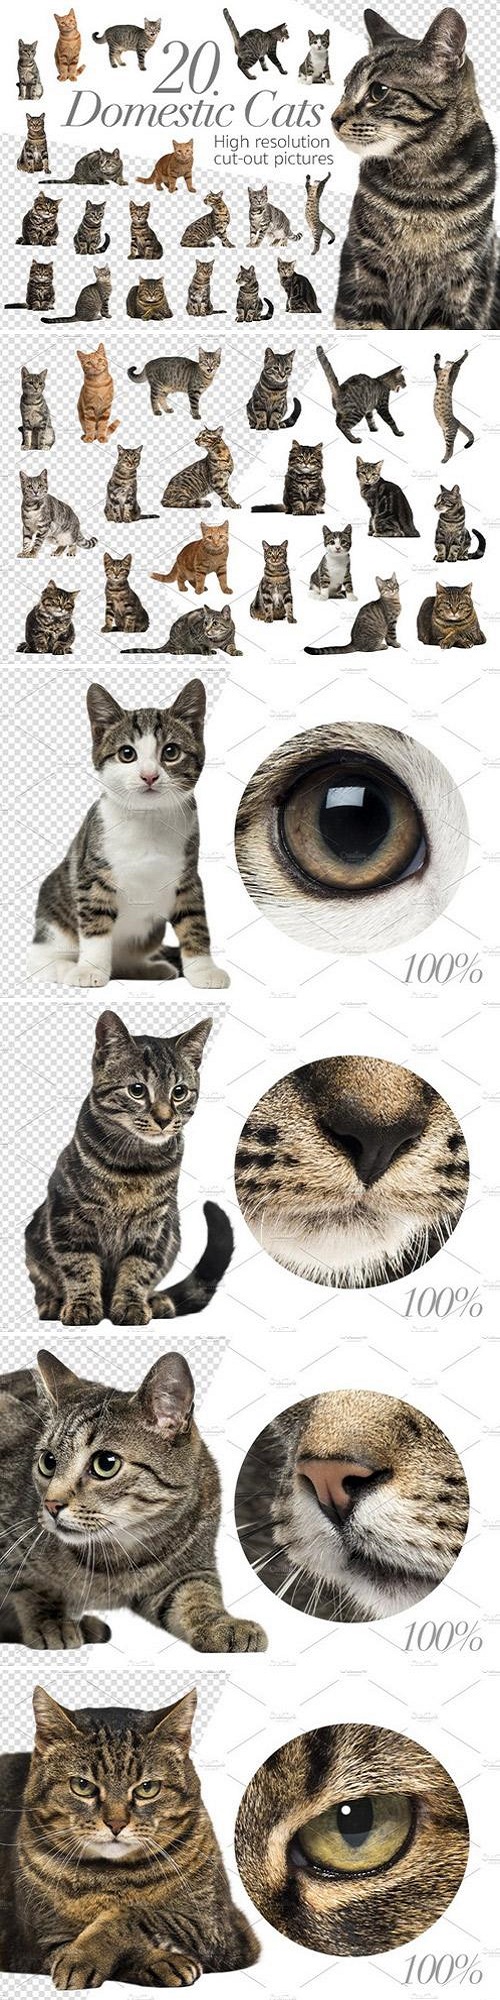 20 Domestic Cats - Cut-out Pictures 2316524